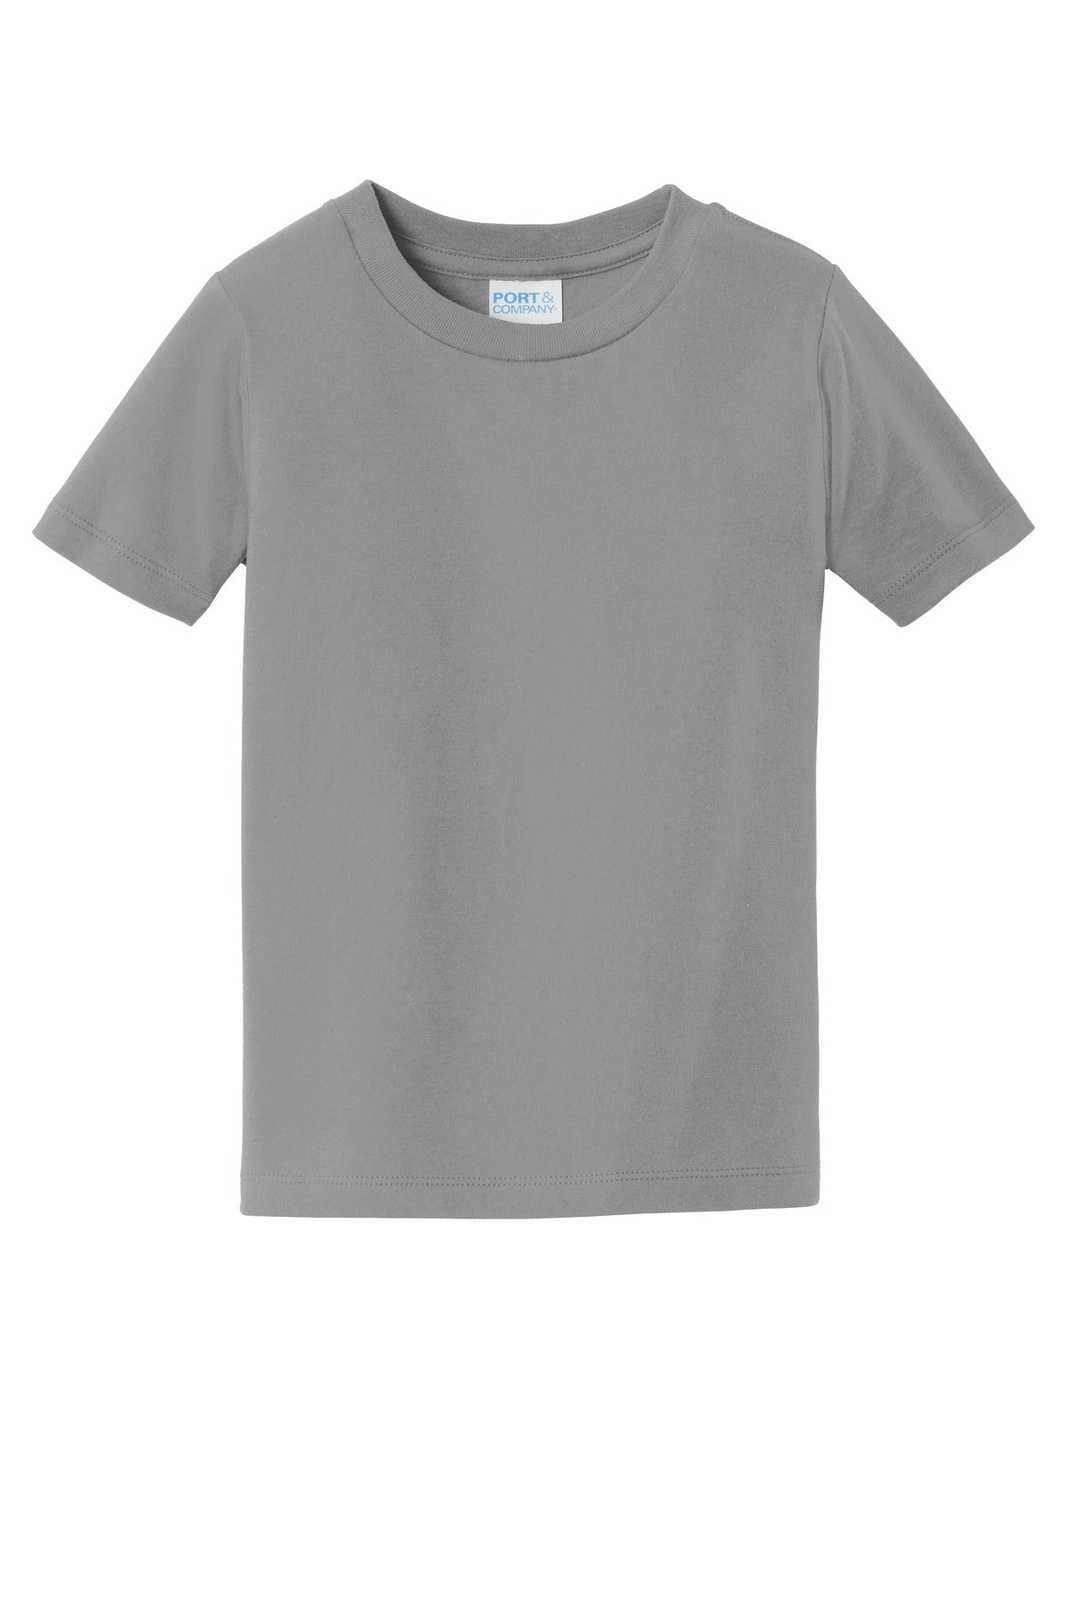 Port & Company PC450TD Toddler Fan Favorite Tee - Medium Gray - HIT a Double - 1